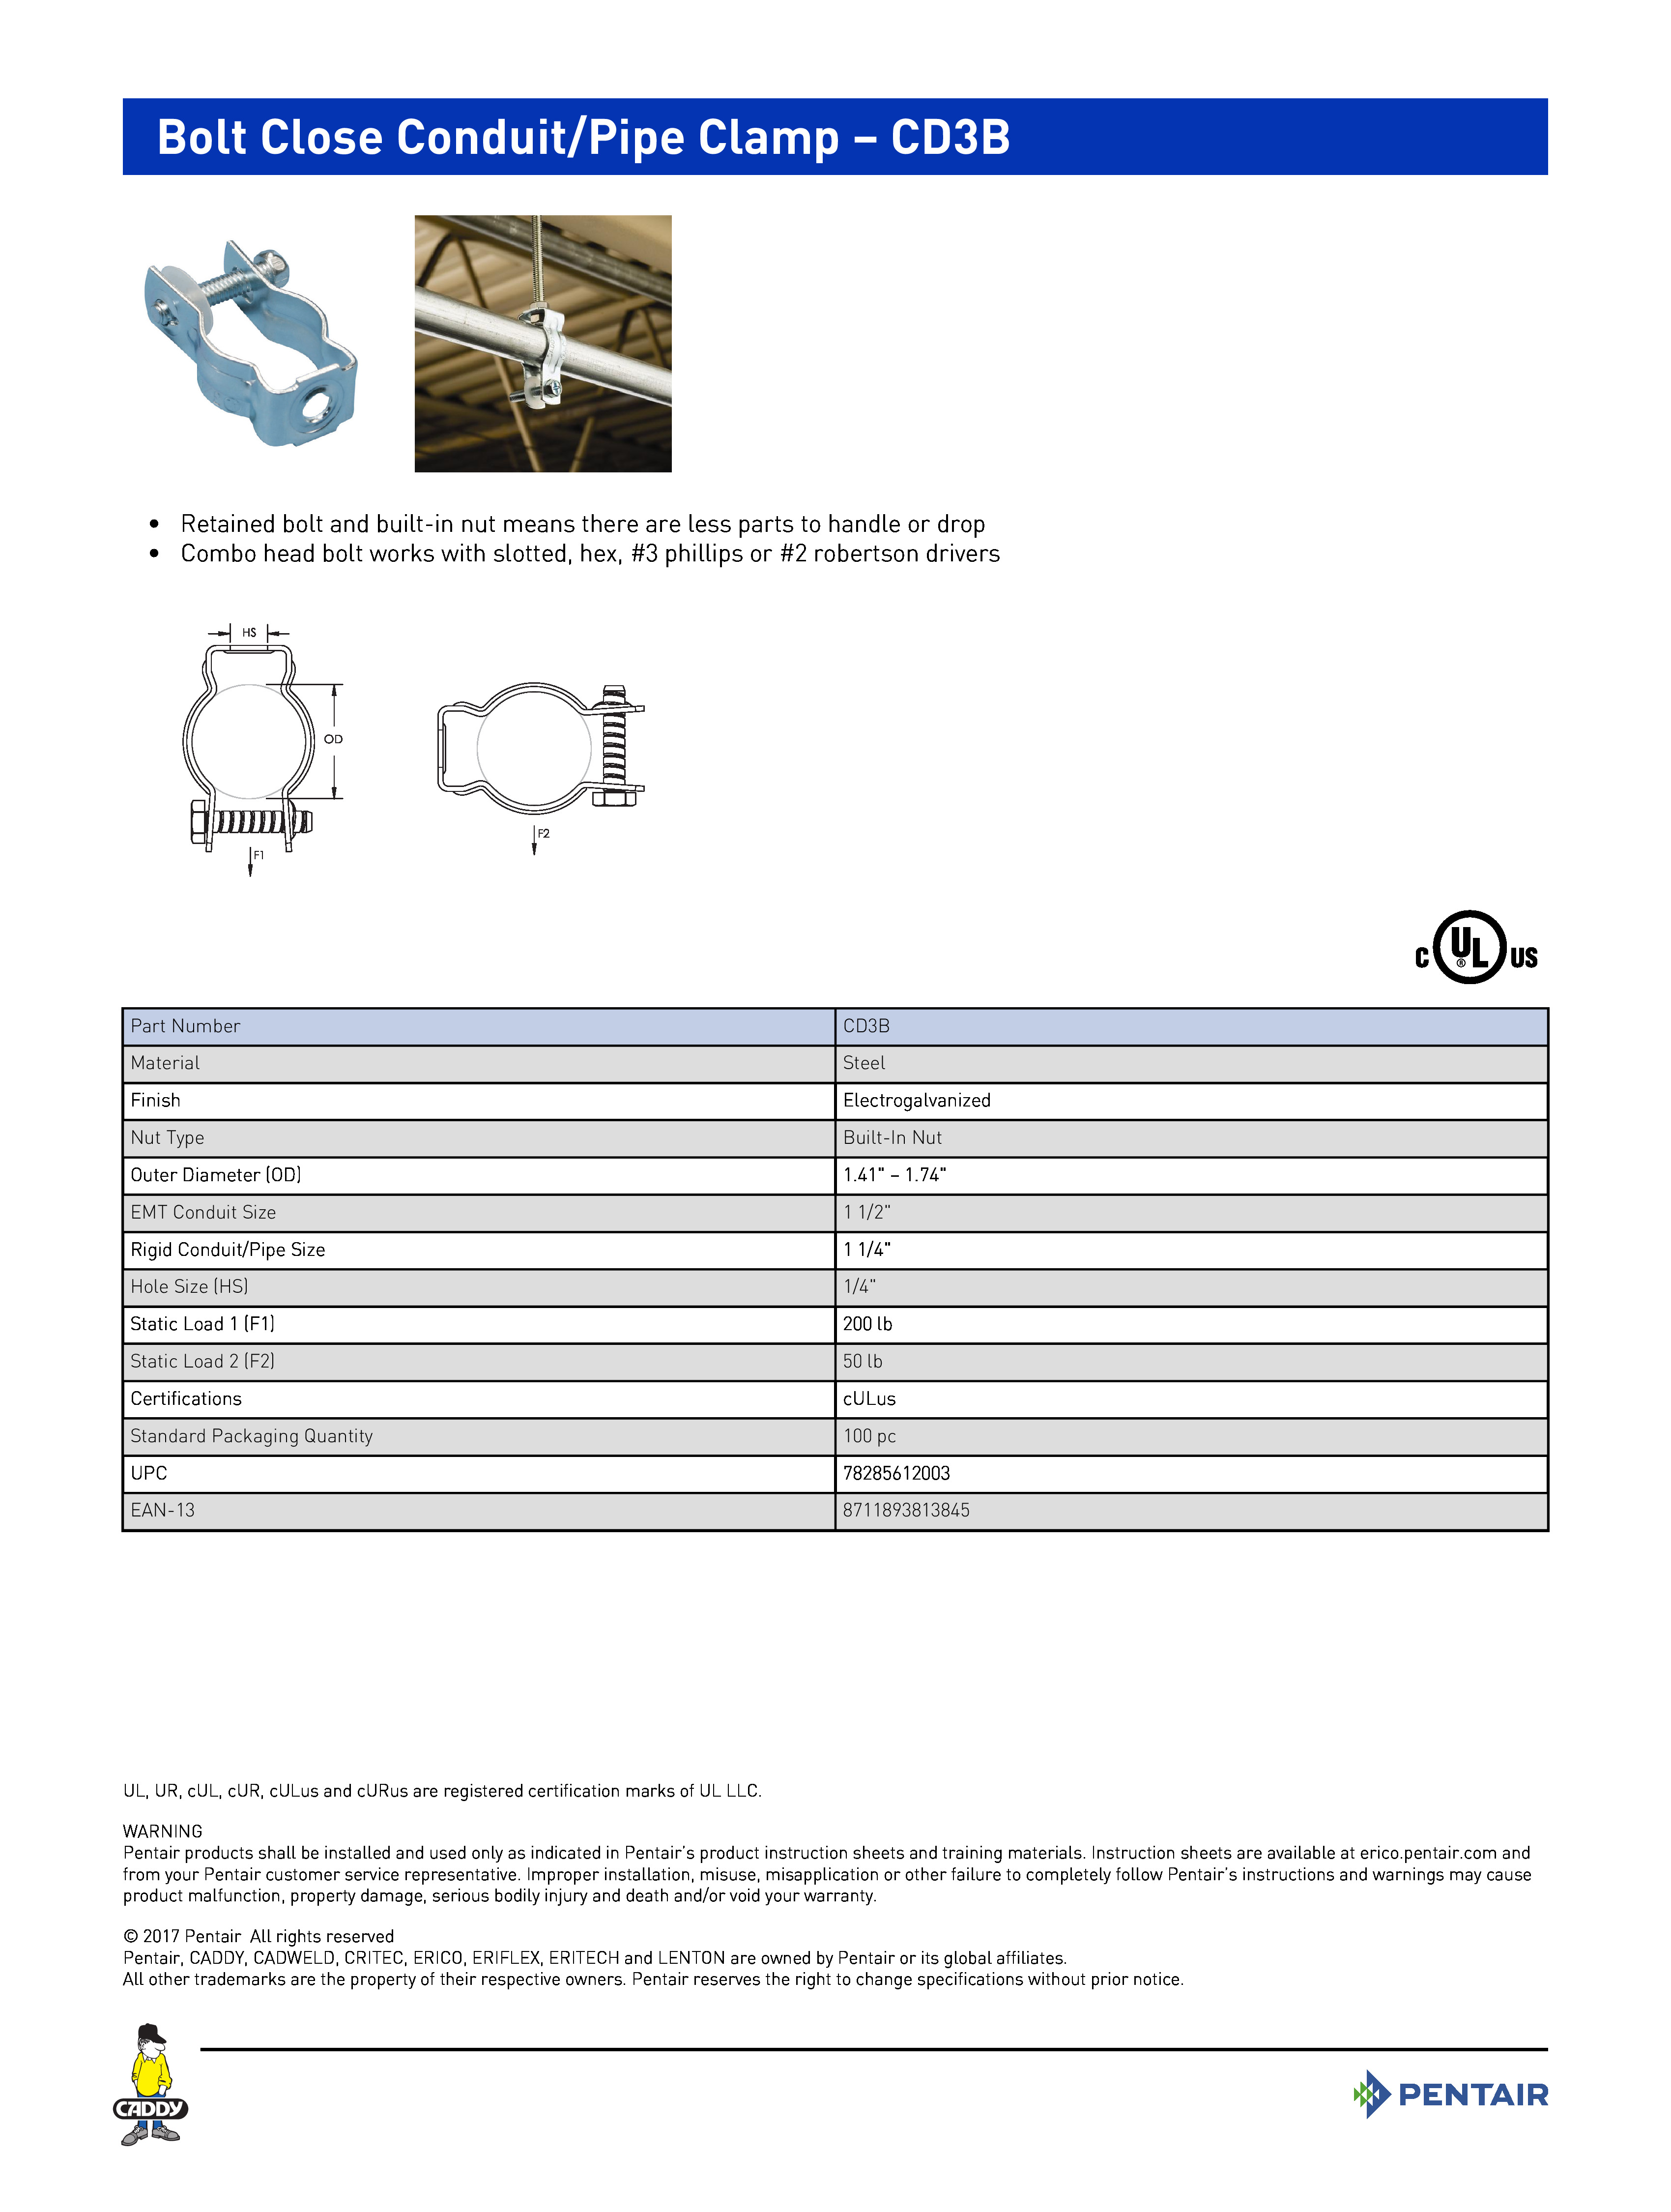 Bolt Close Conduit/Pipe Clamp – CD3B	
 	
•	Retained bolt and built-in nut means there are less parts to handle or drop	
•	Combo head bolt works with slotted, hex, #3 phillips or #2 robertson drivers	
 	
Part NumberCD3BMaterialSteelFinishElectrogalvanizedNut TypeBuilt-In NutOuter Diameter (OD)1.41" – 1.74"EMT Conduit Size1 1/2"Rigid Conduit/Pipe Size1 1/4"Hole Size (HS)1/4"Static Load 1 (F1)200 lbStatic Load 2 (F2)50 lbCertificationscULusStandard Packaging Quantity100 pcUPC78285612003EAN-138711893813845
UL, UR, cUL, cUR, cULus and cURus are registered certification marks of UL LLC. WARNINGPentair products shall be installed and used only as indicated in Pentair’s product instruction sheets and training materials. Instruction sheets are available at erico.pentair.com andfrom your Pentair customer service representative. Improper installation, misuse, misapplication or other failure to completely follow Pentair’s instructions and warnings may causeproduct malfunction, property damage, serious bodily injury and death and/or void your warranty. 